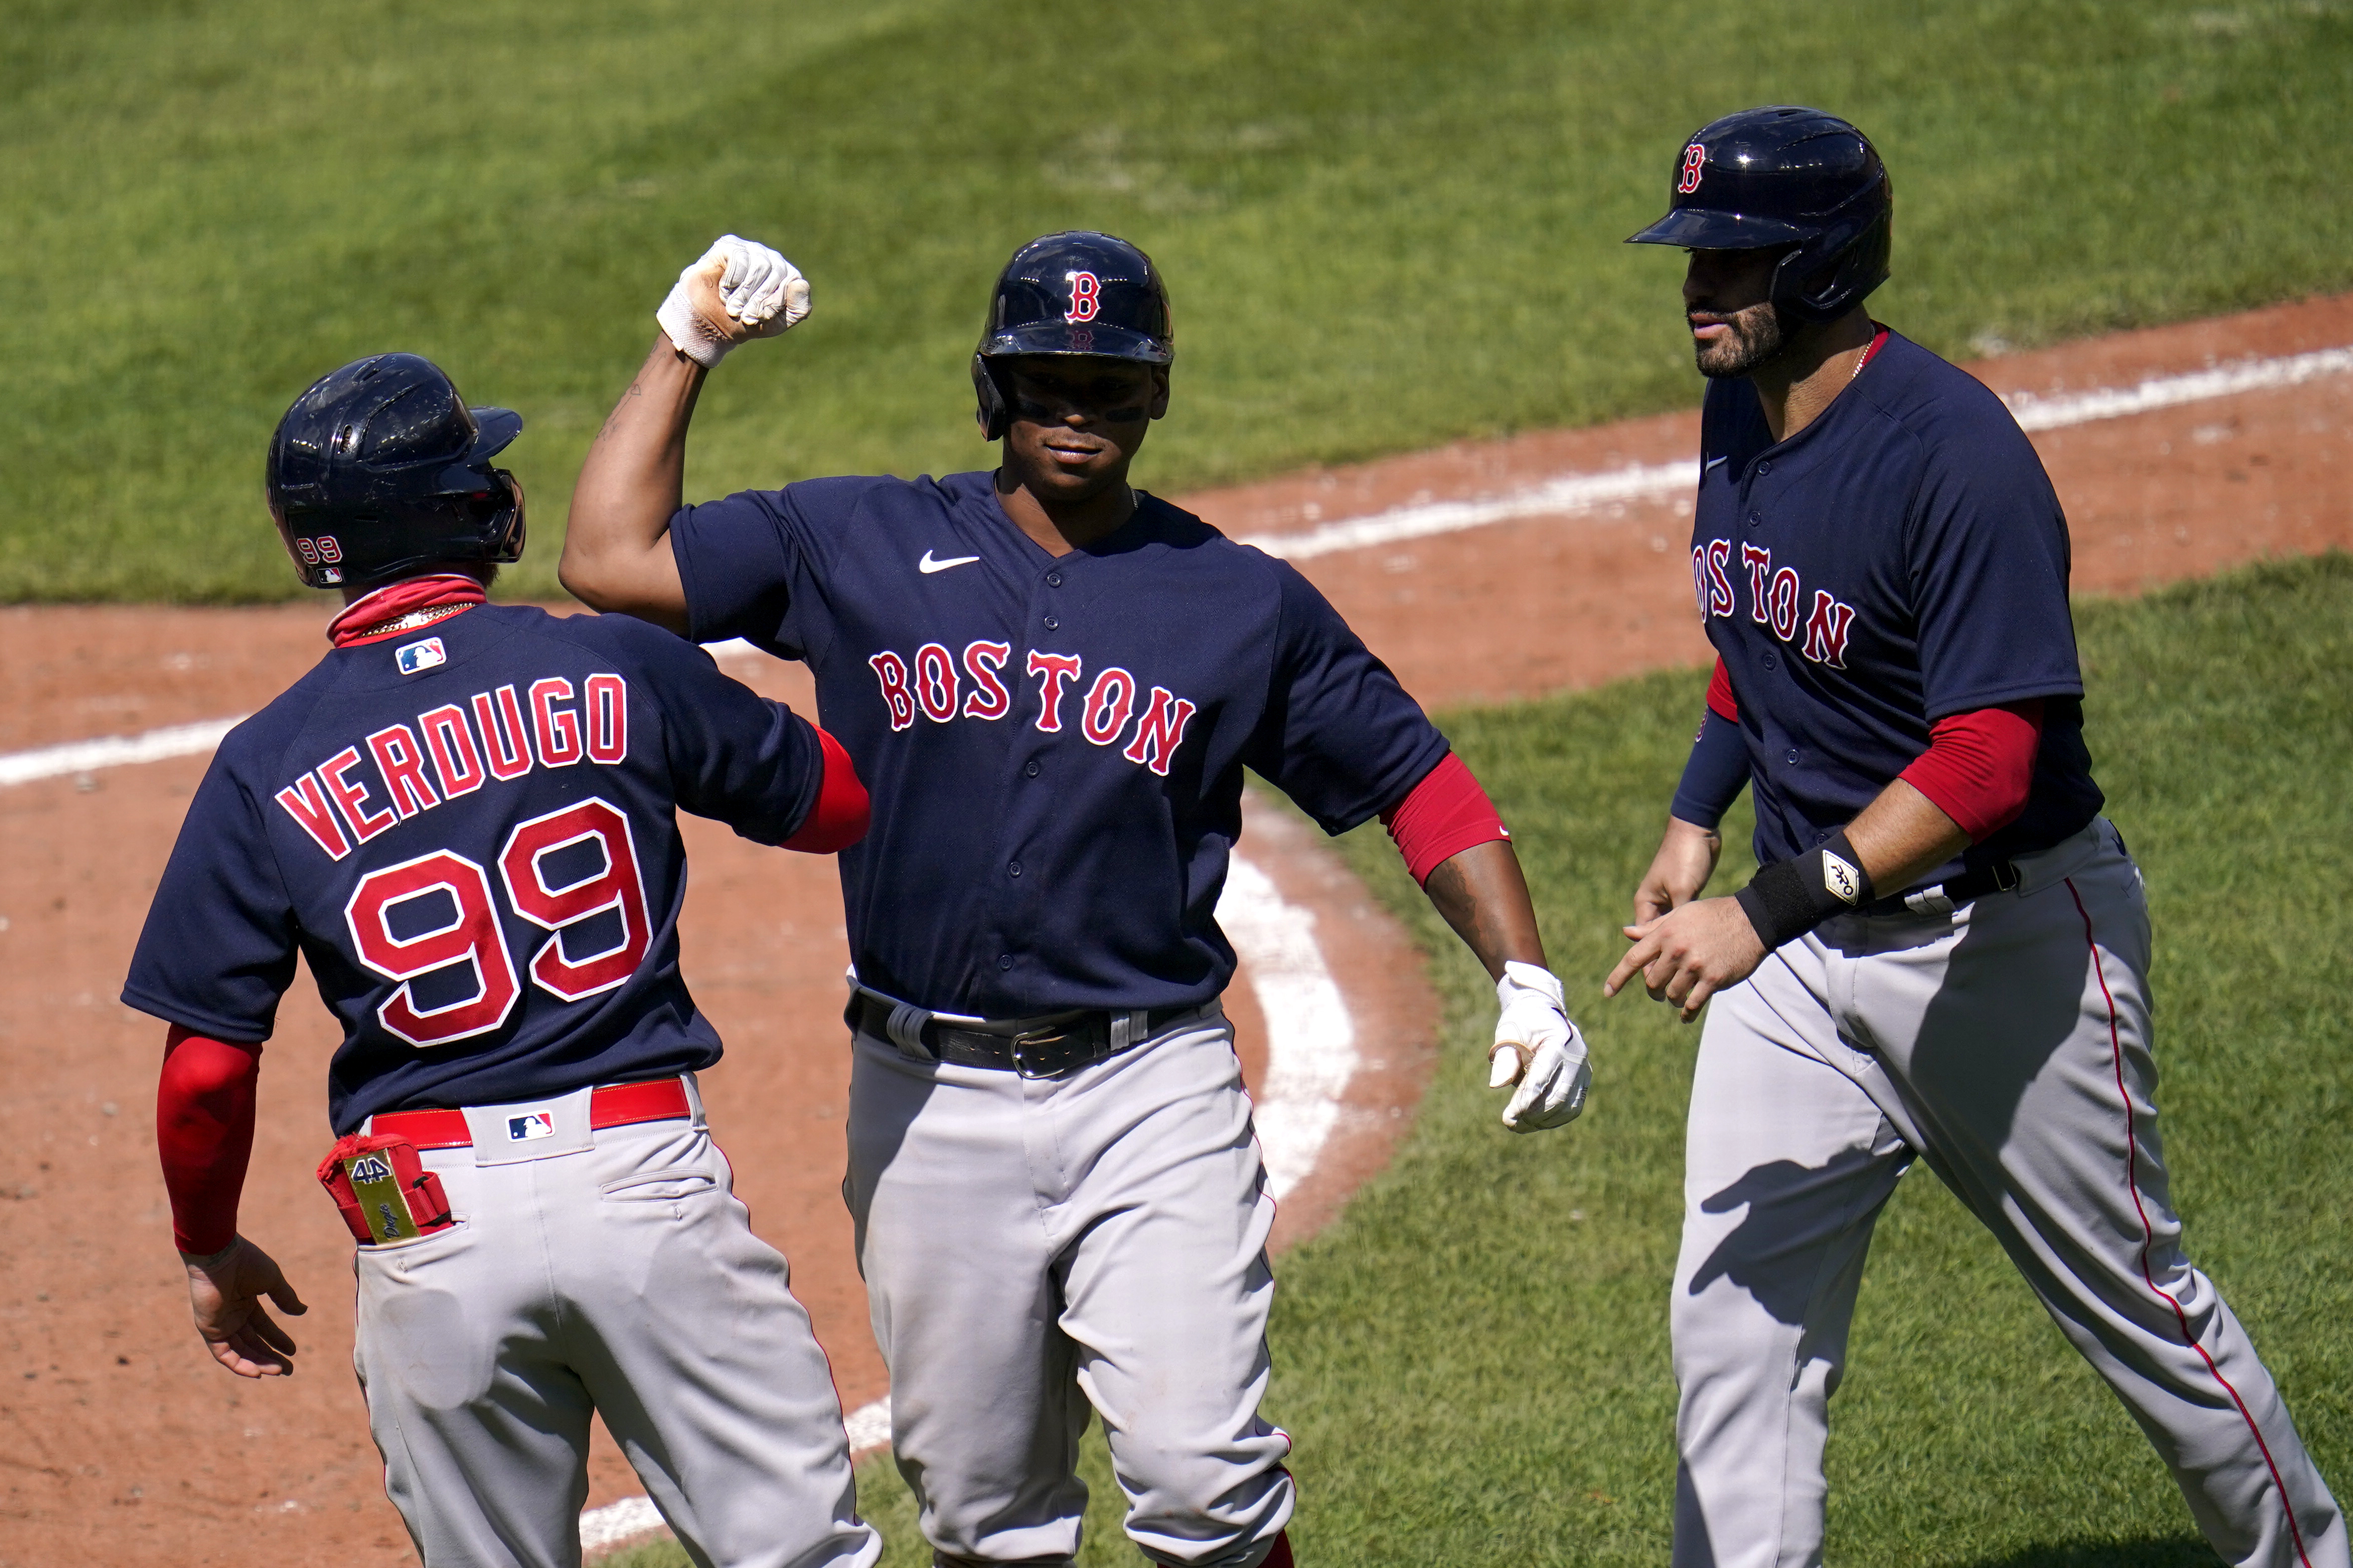 J.D. Martinez crushes two homers to lead Boston Red Sox over